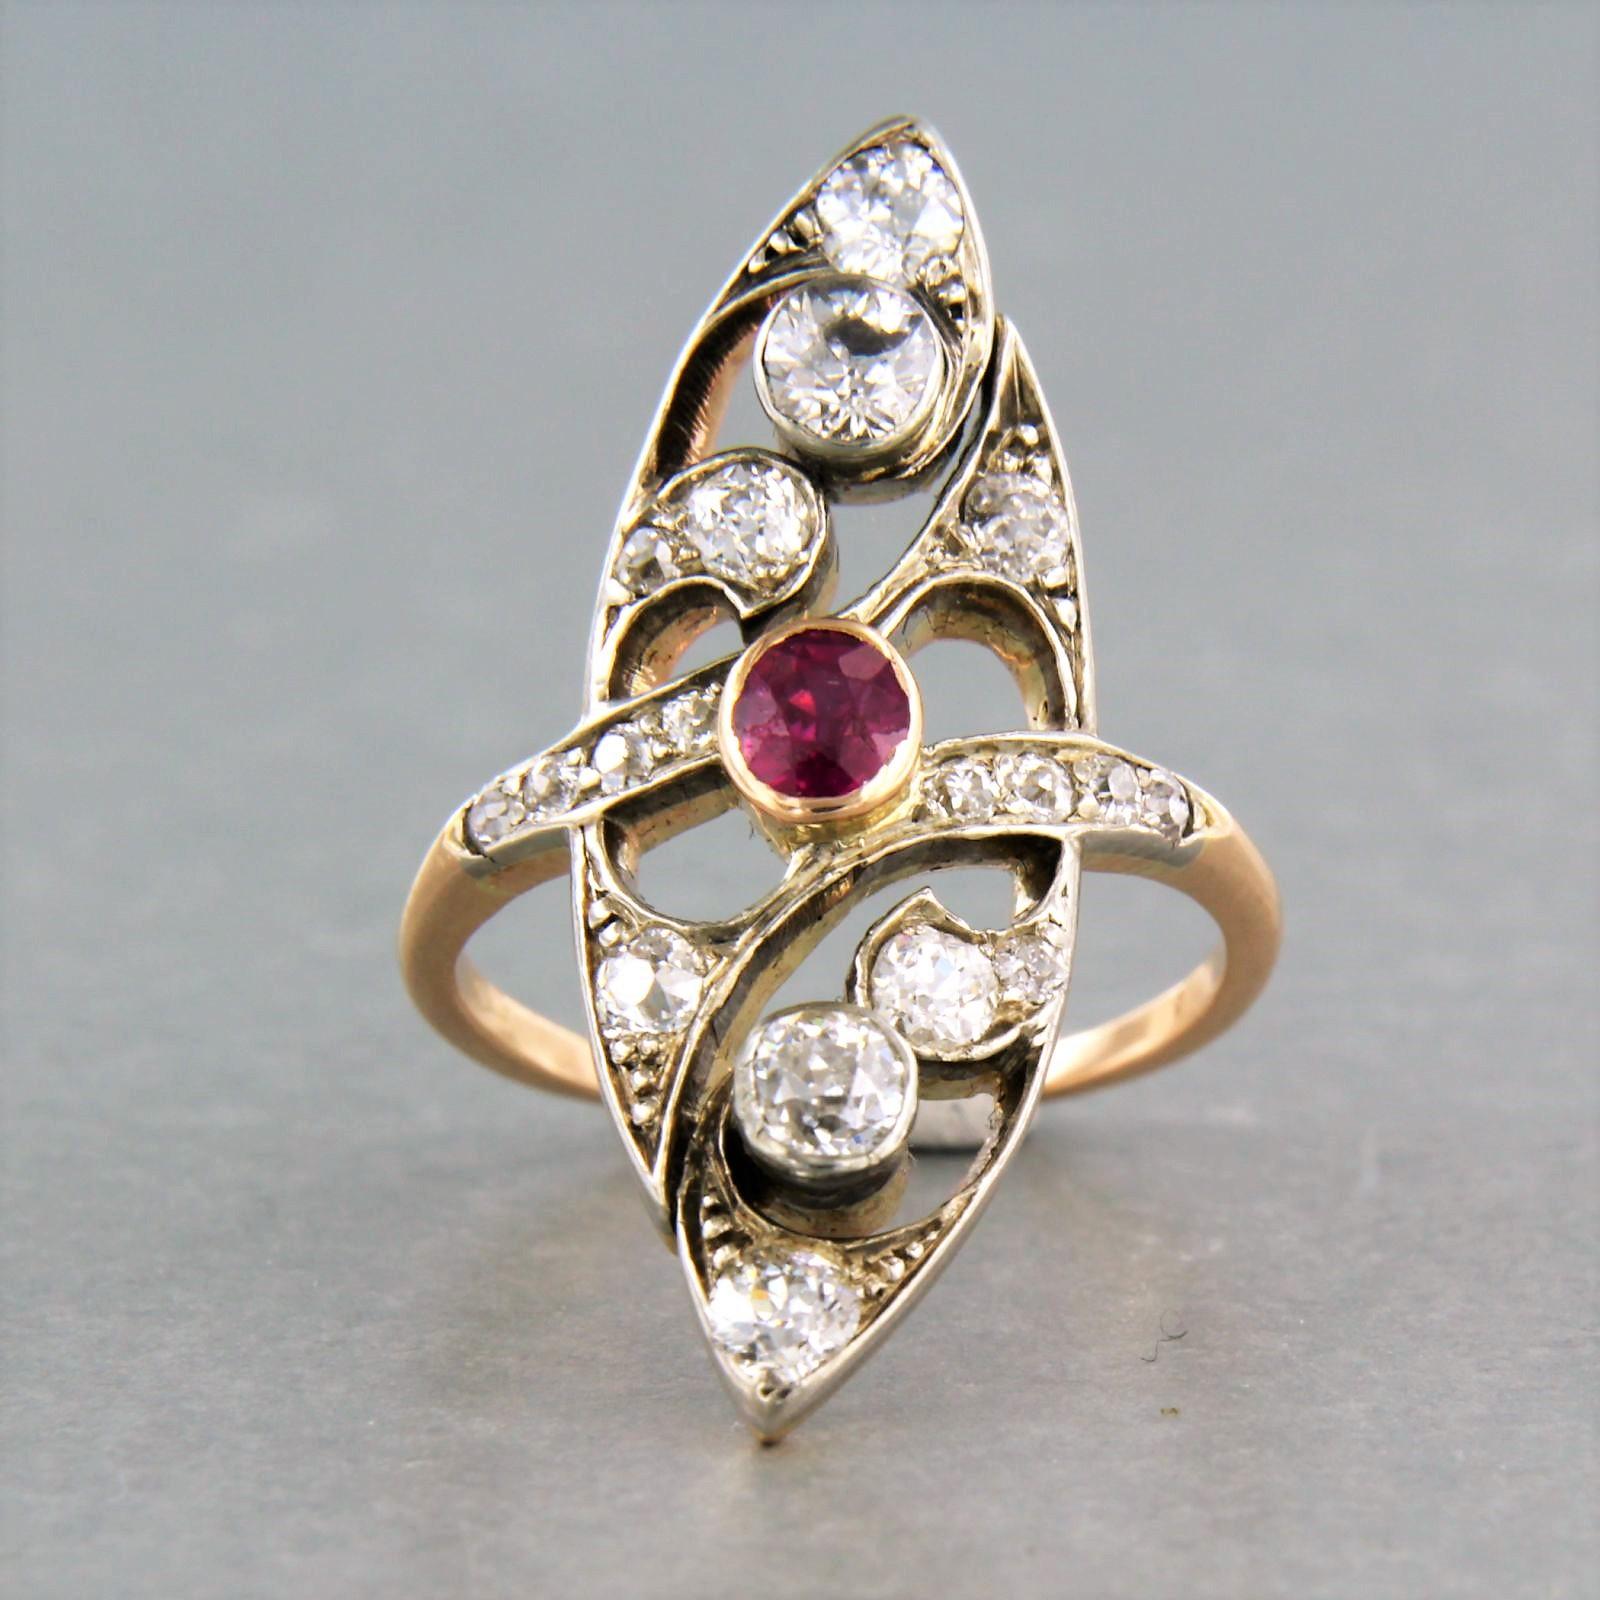 14k yellow gold with silver ring set with ruby ​​and old mine cut diamond. 1.60ct - F, G/H - SI - ring size U.S. 6.5 - EU. 17 (53)

detailed description:

the top of the ring is 3.1 cm wide

ring size US 6.5 - EU. 17 (53), ring can be enlarged or